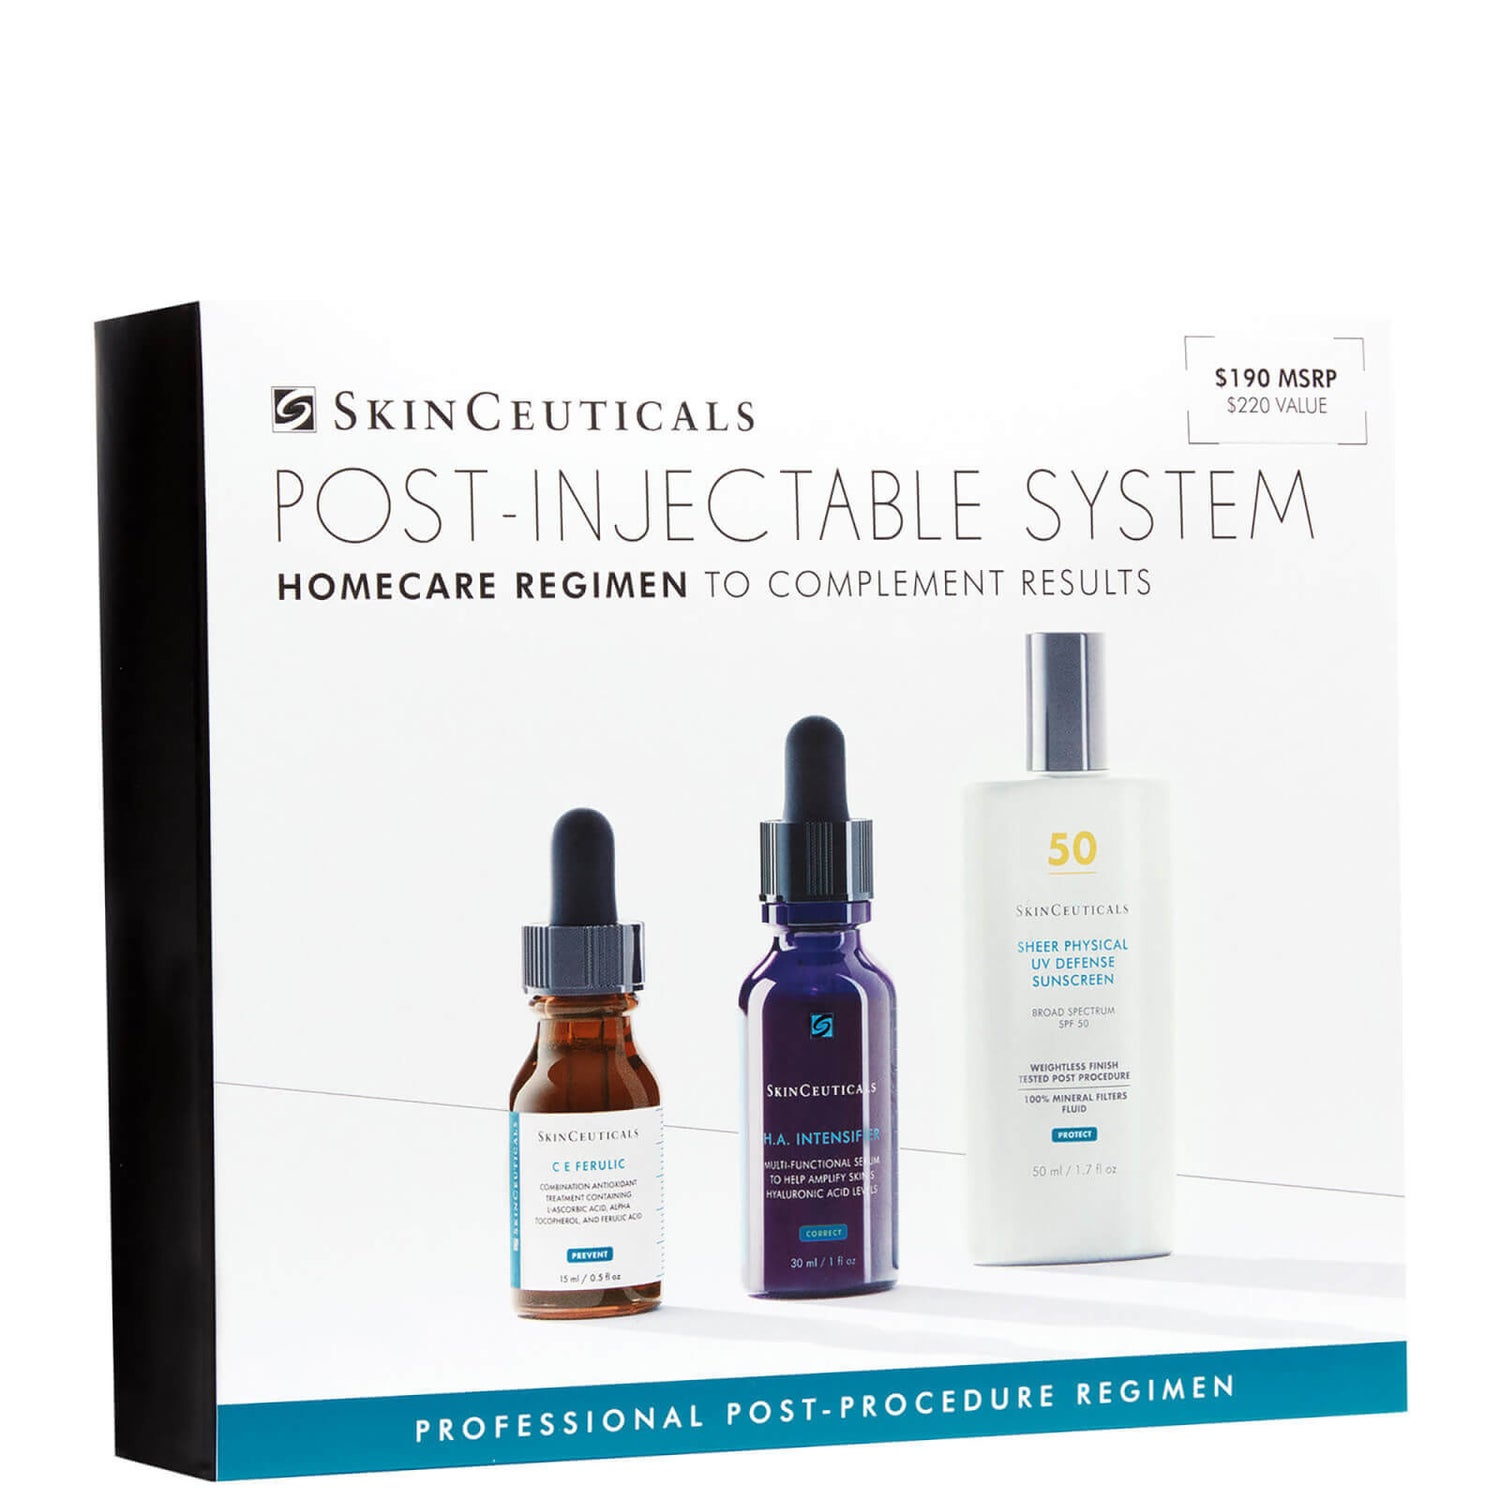 SkinCeuticals Post-Injectable Hyaluronic Acid System ($243.00 Value)